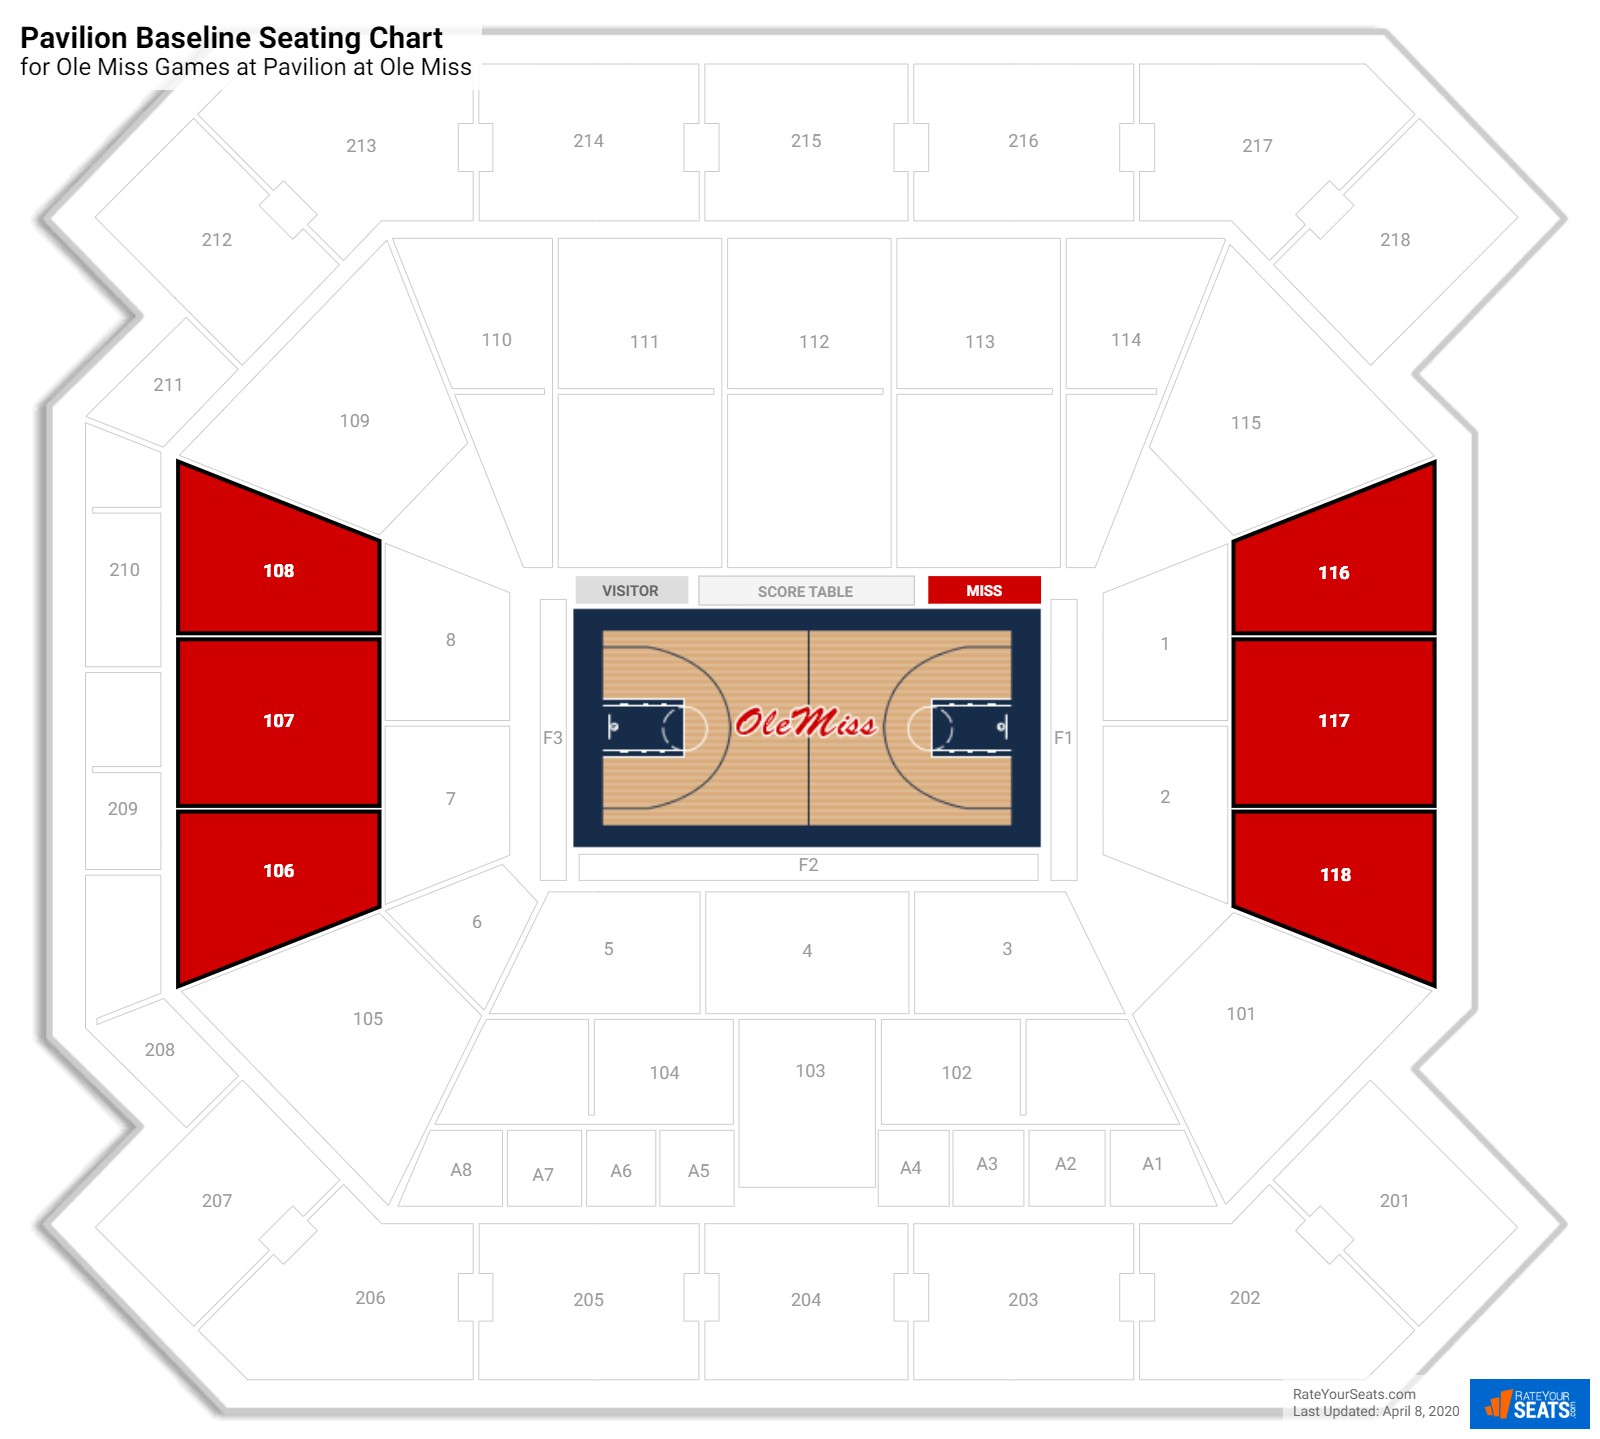 Pavilion at Ole Miss (Ole Miss) Seating Guide ...